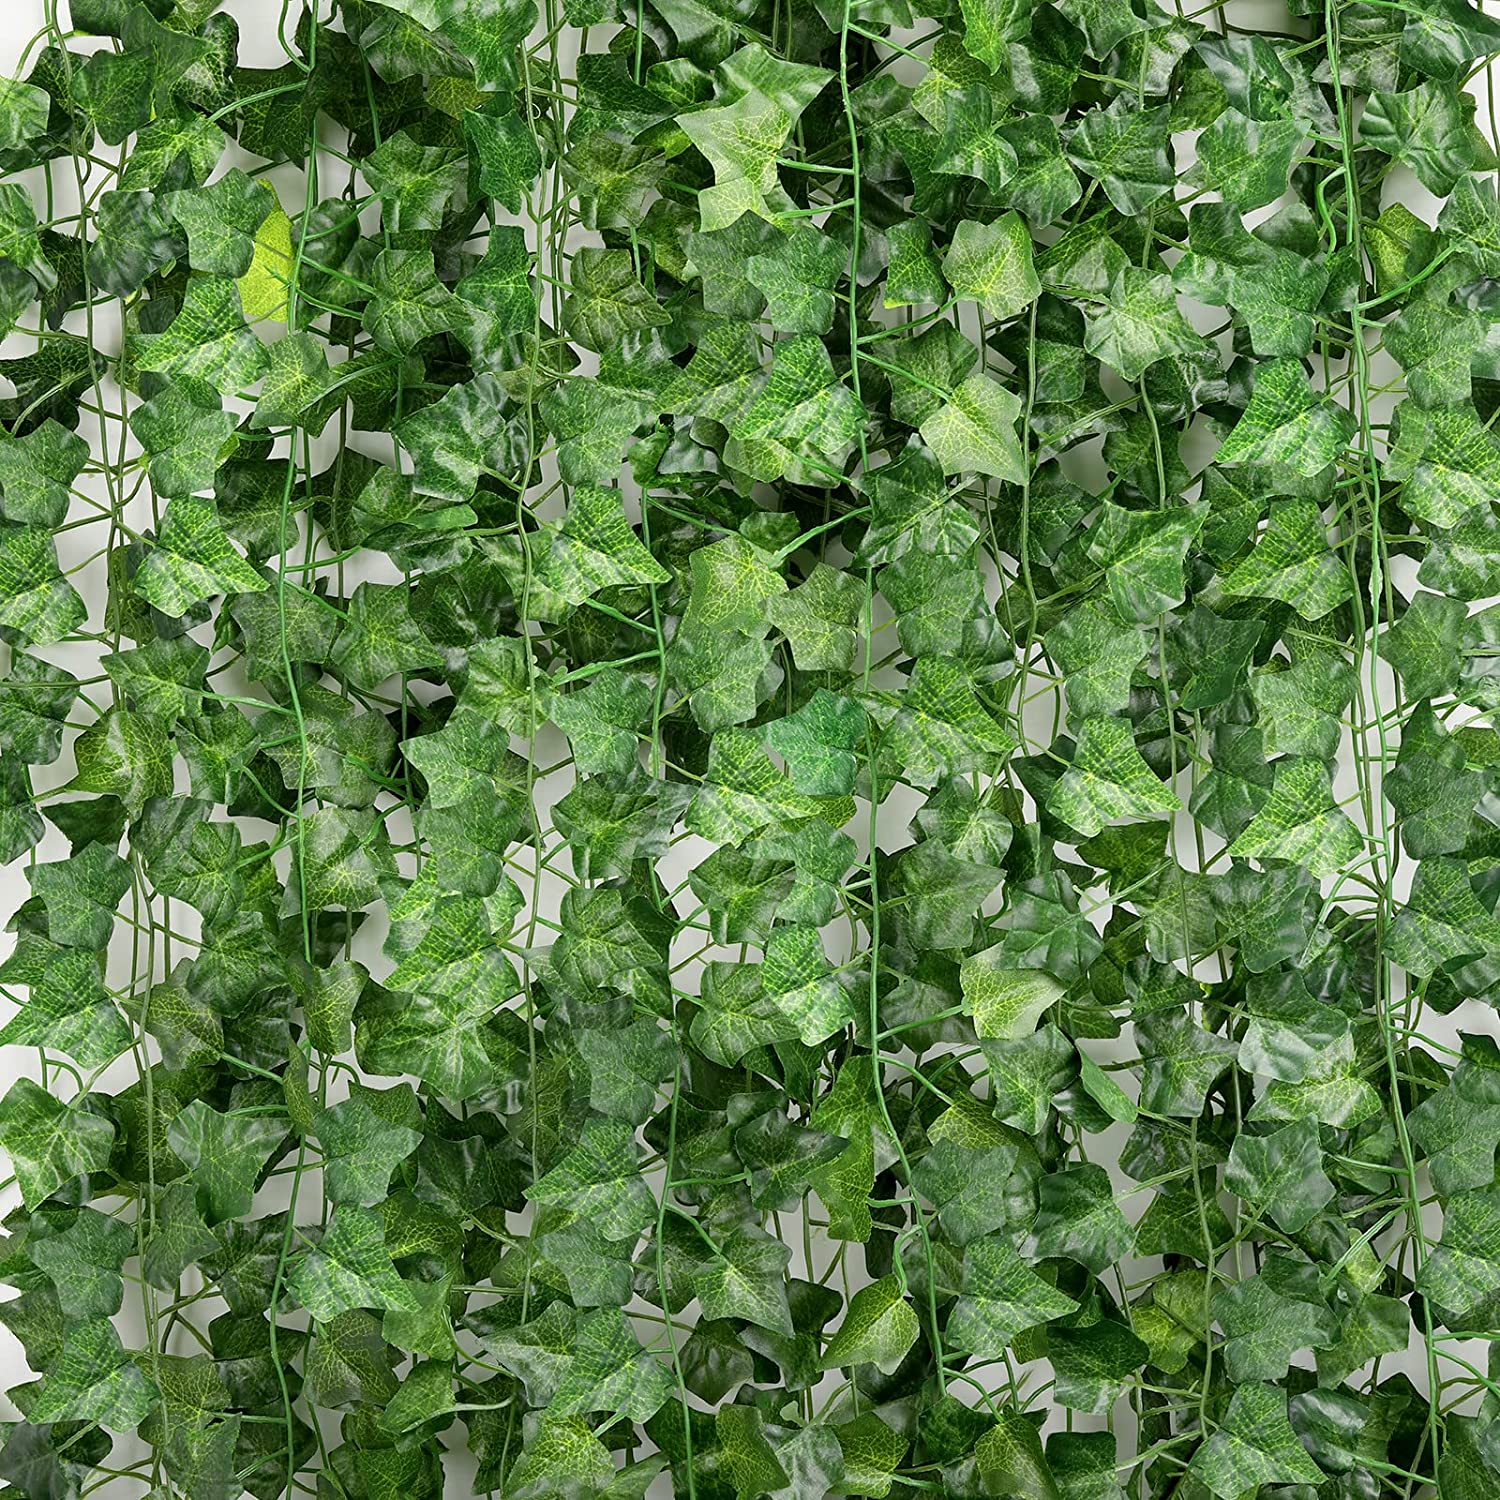 36 Strands 248Ft Fake Ivy Garlands Leaves Artificial Vines Faux Green Hanging Plants for Bedroom Wall House Decor Outdoor Wedding Photography